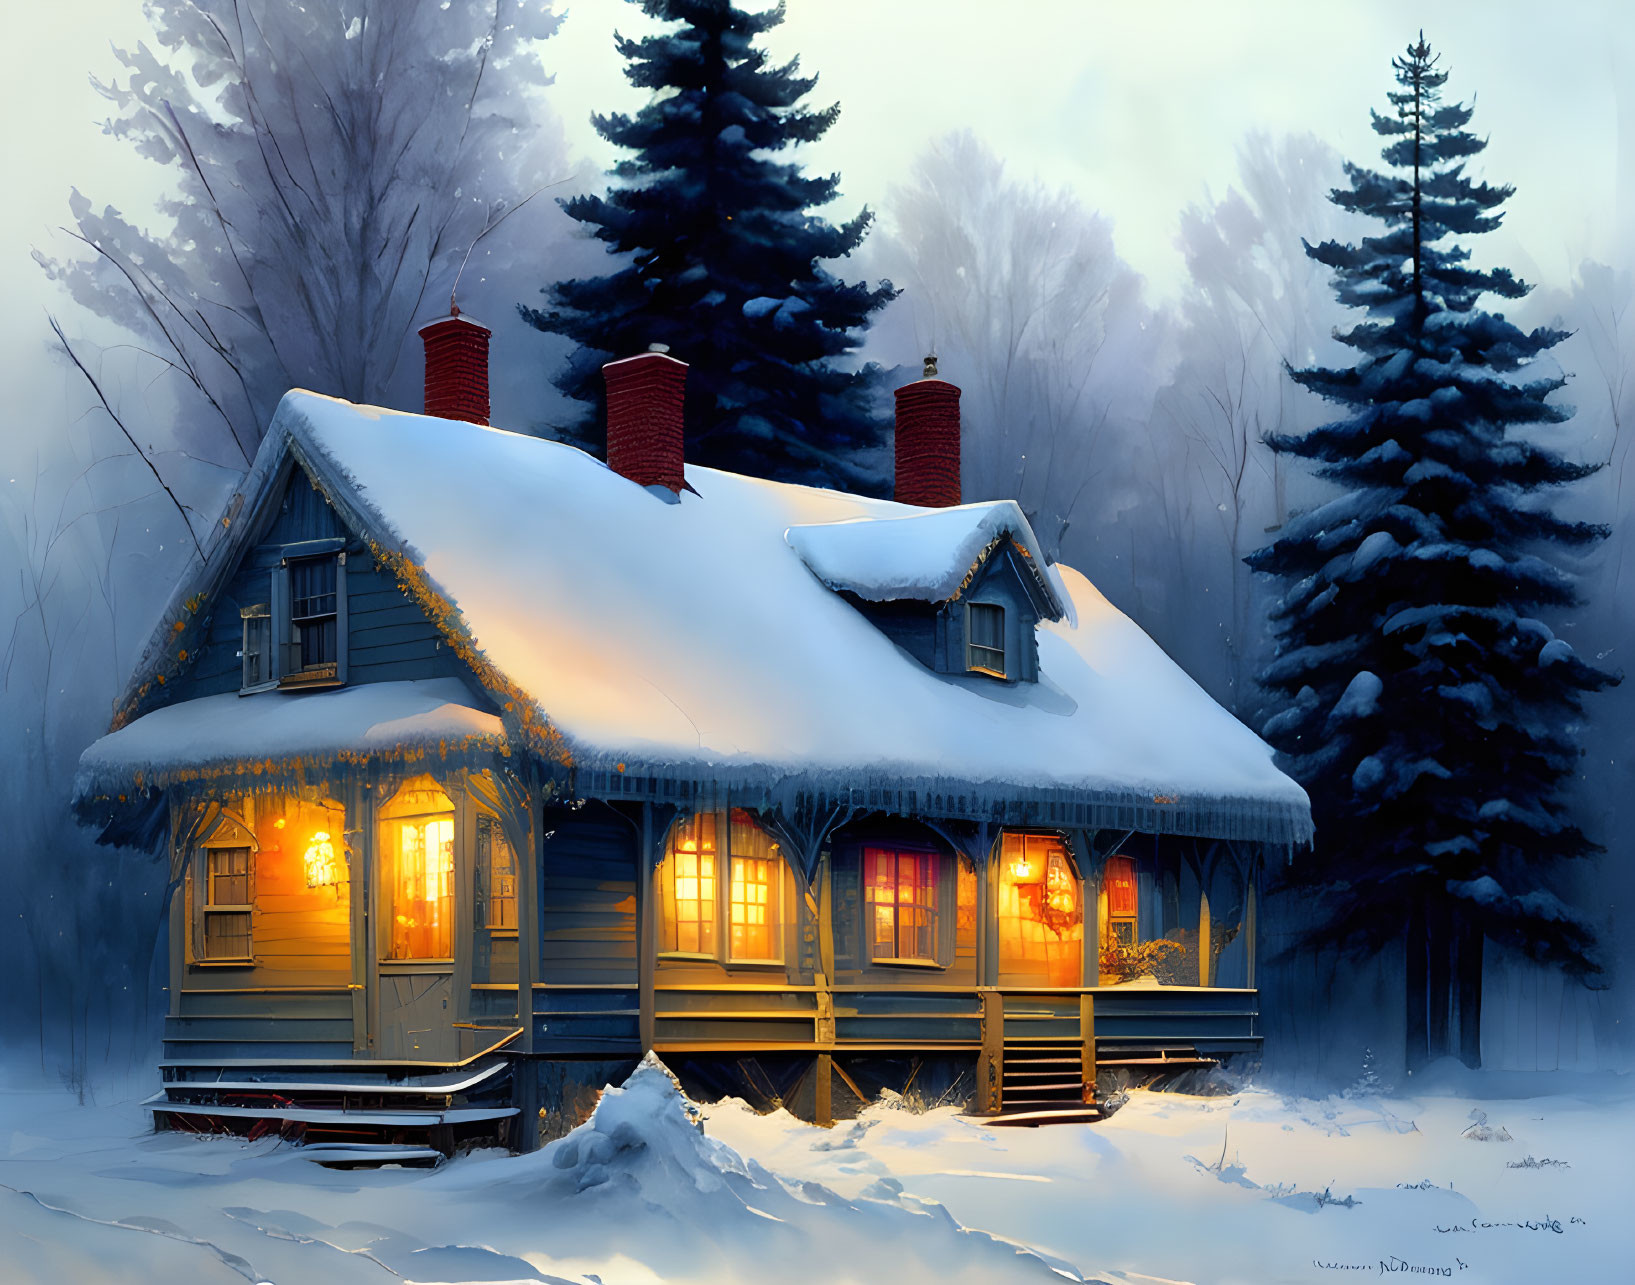 Snow-covered cabin with warm lights in tranquil winter landscape